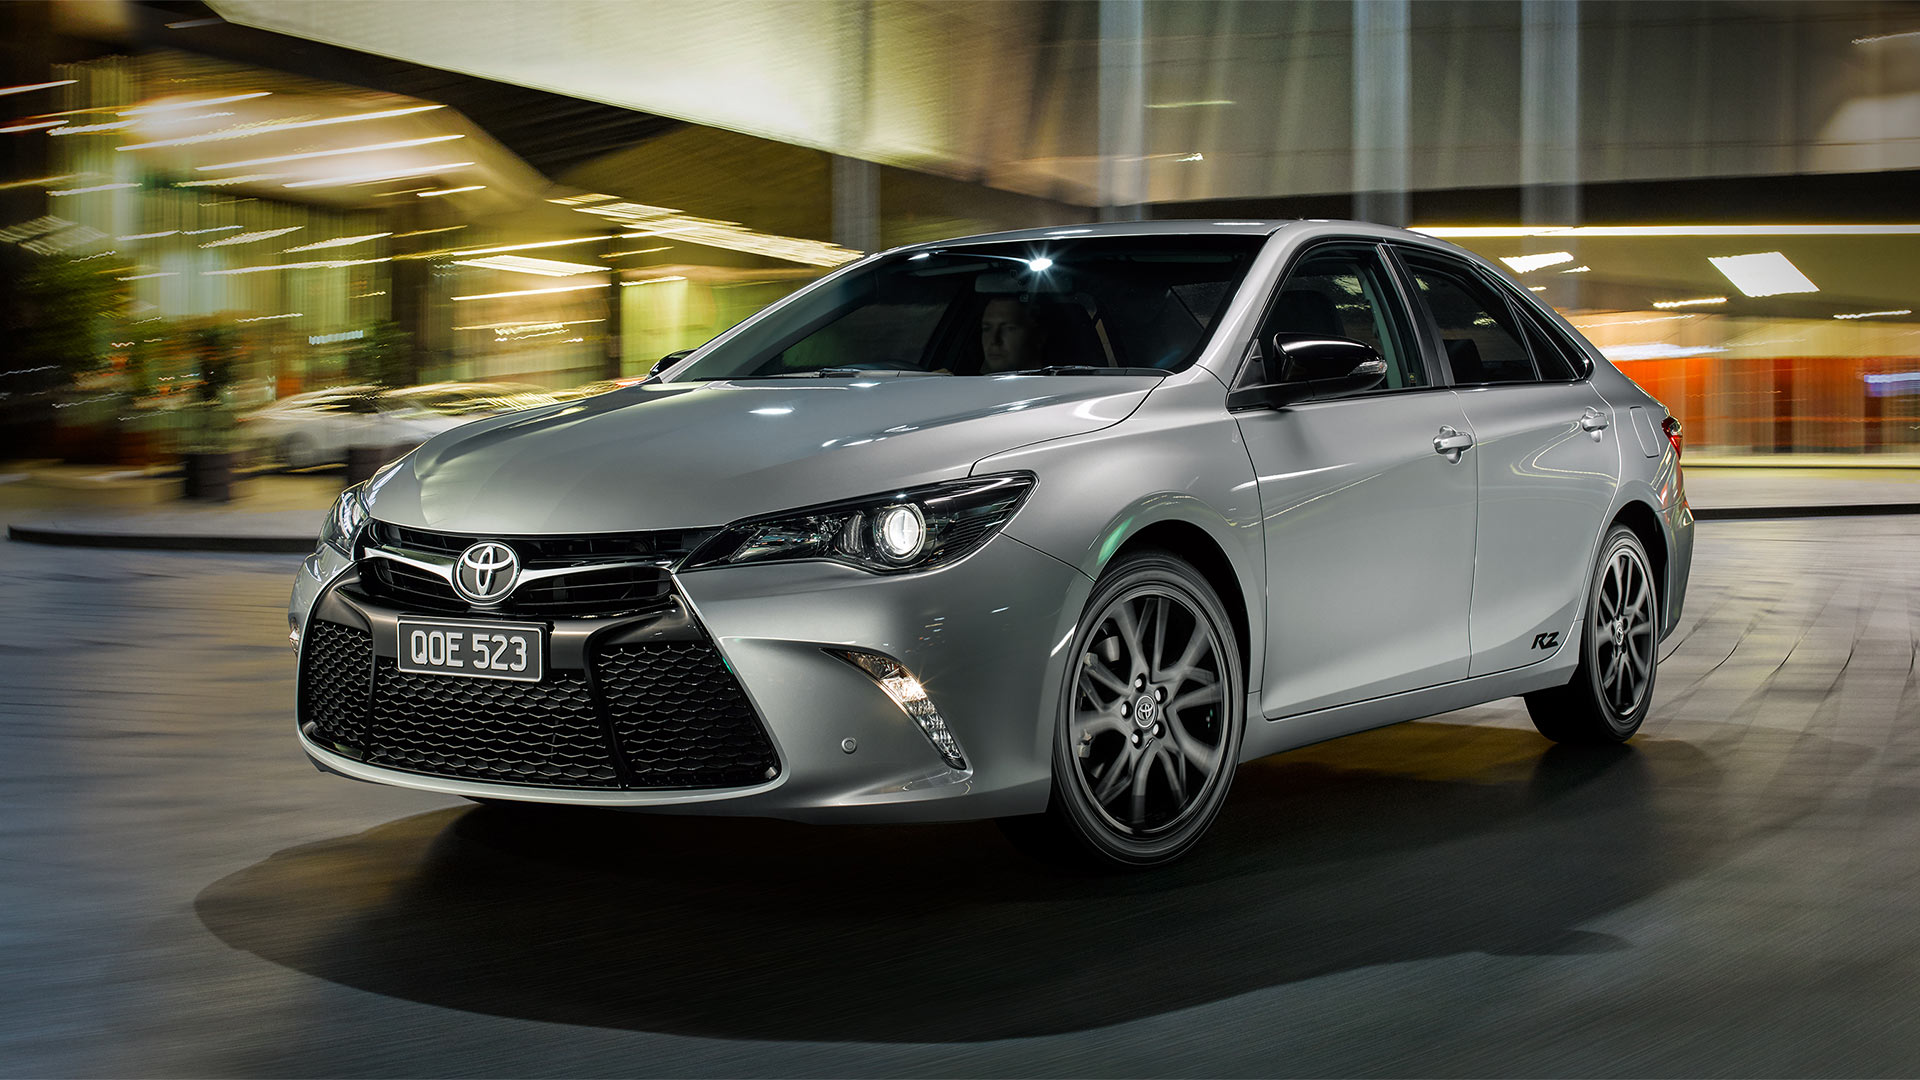 Camry-RZ-Front_1920x1080